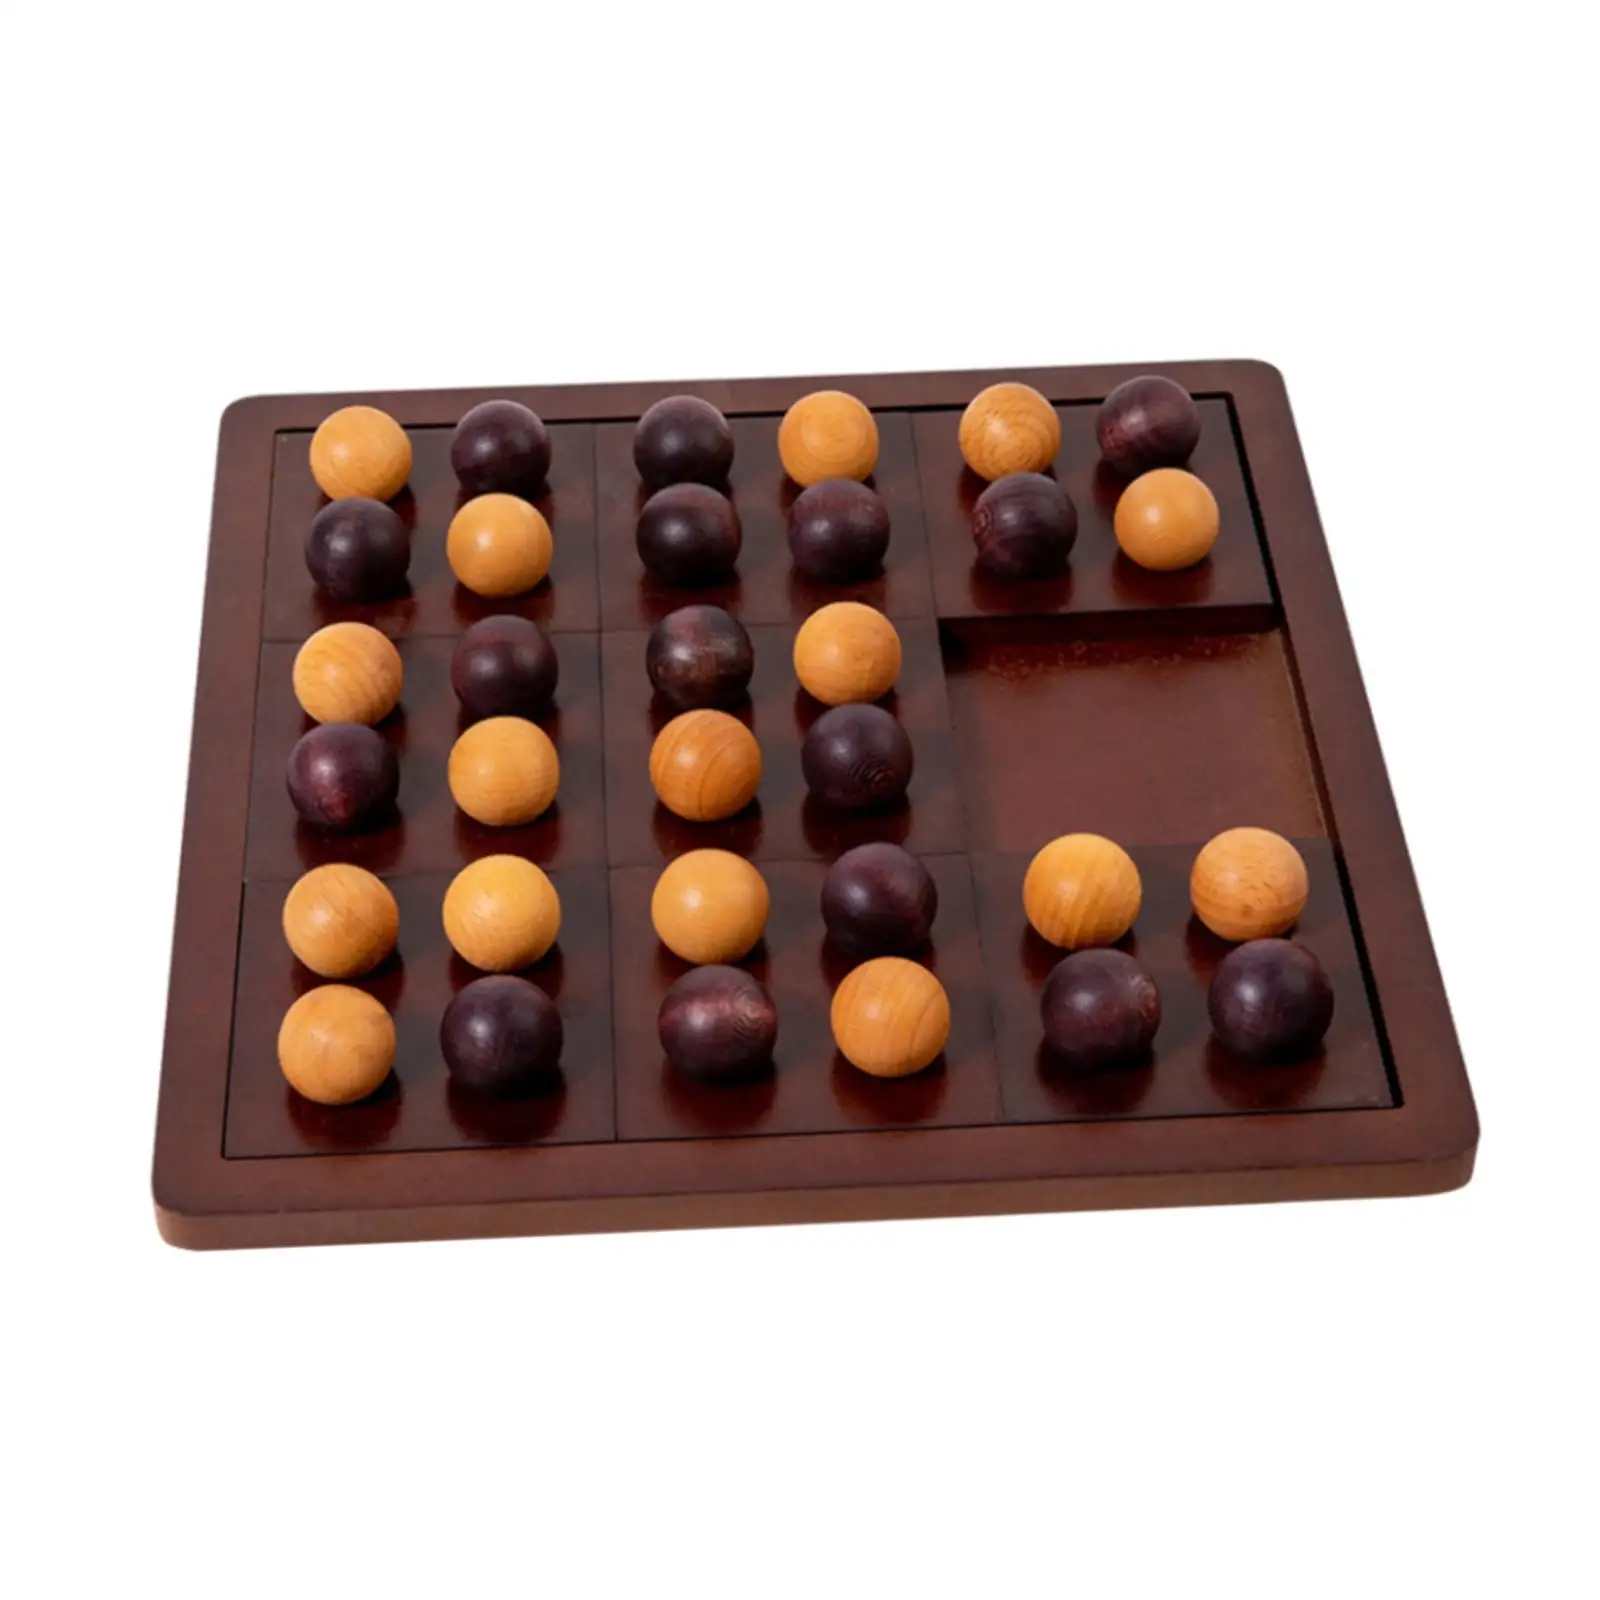 Wood Tic TAC Toe Game Leisure Intelligent Dual Challenge Board Game Chess Toy for Families Children Adults Outdoor Indoor Gifts